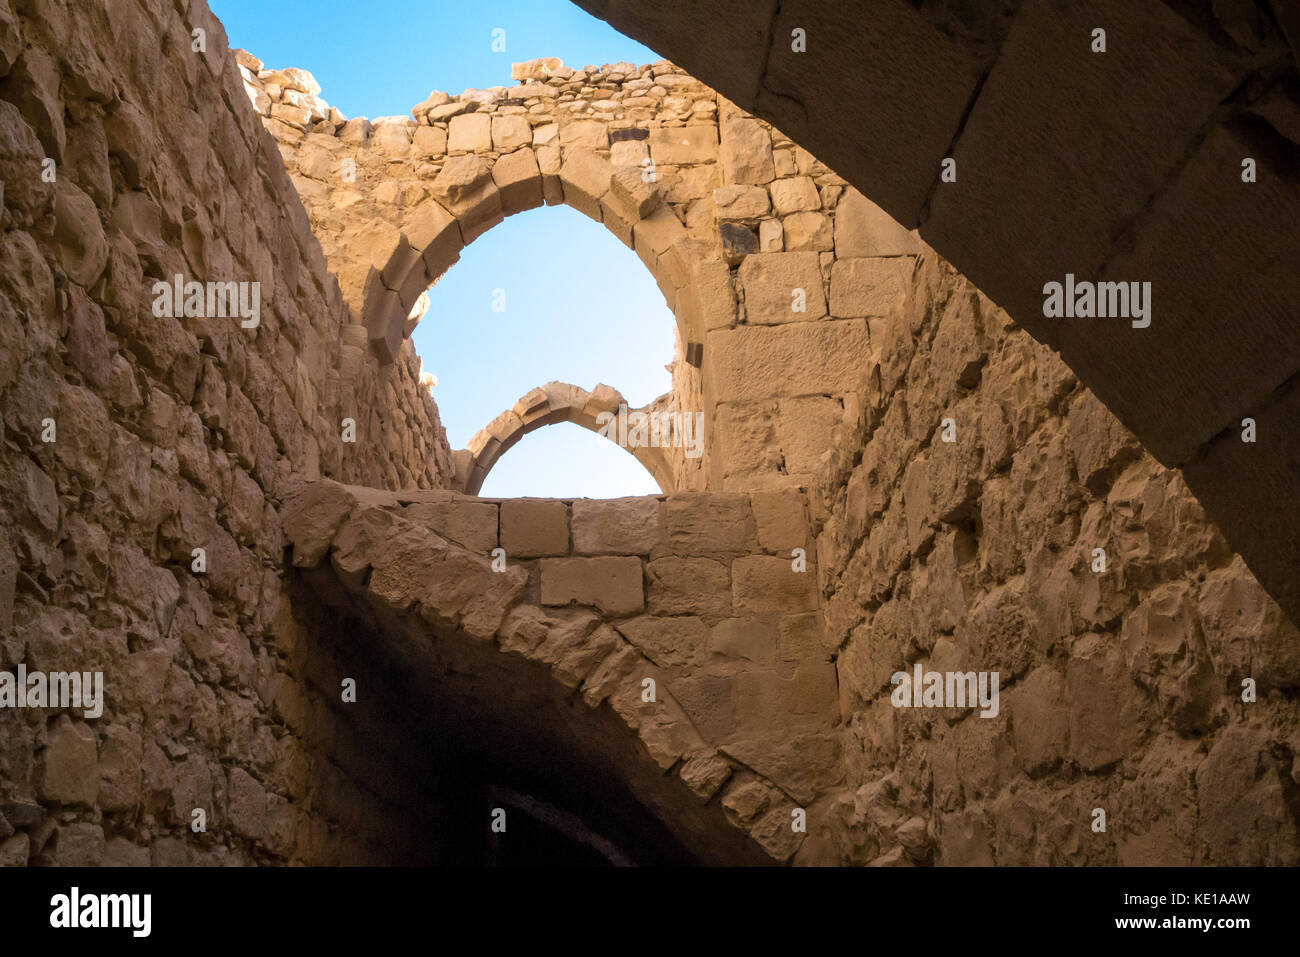 Detail of castle arches, Montreal or Shoubak Castle, 12th century crusader fort, Kings Highway, Jordan, Middle East Stock Photo